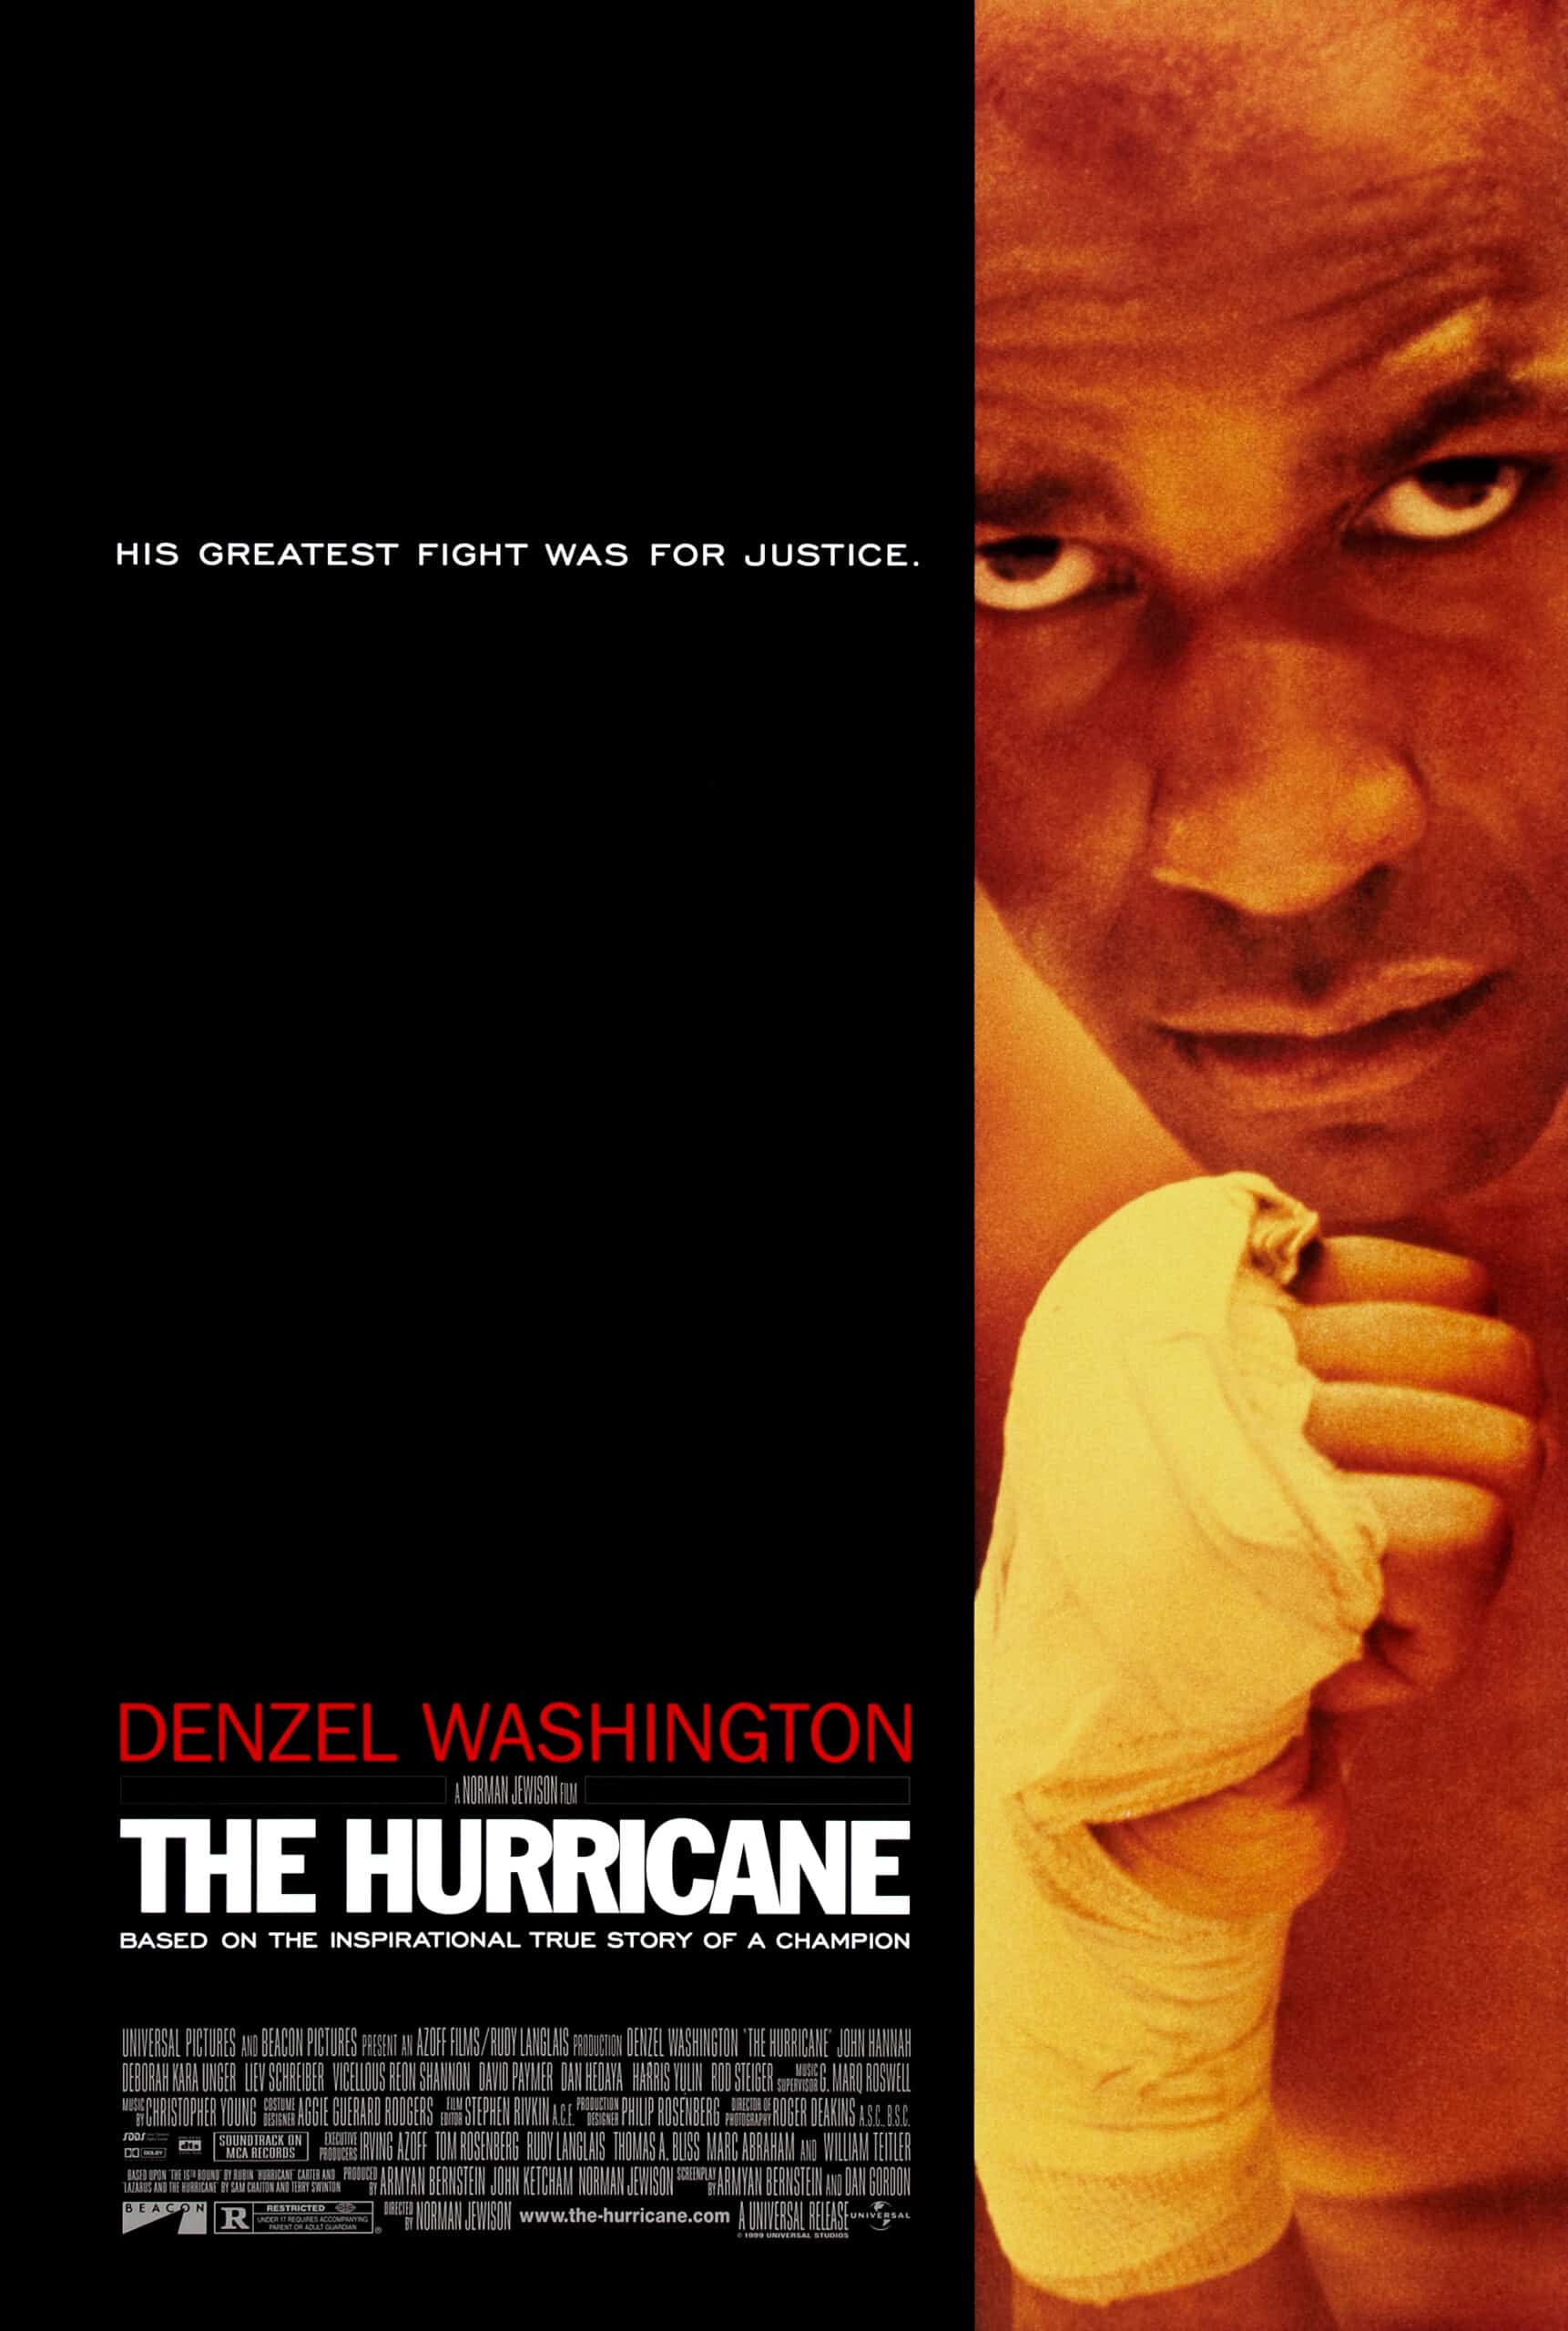 Best Boxing Movies The Hurricane (1999)